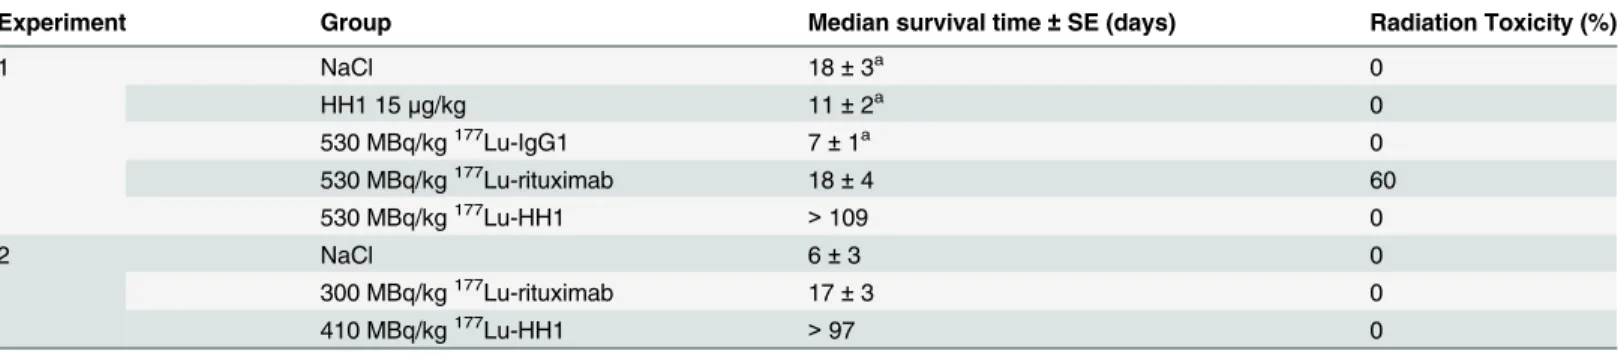 Table 2. Median survival time of mice and percentage of mice euthanized due to radiation toxicity after treatment with 530 MBq/kg 177 Lu-HH1,